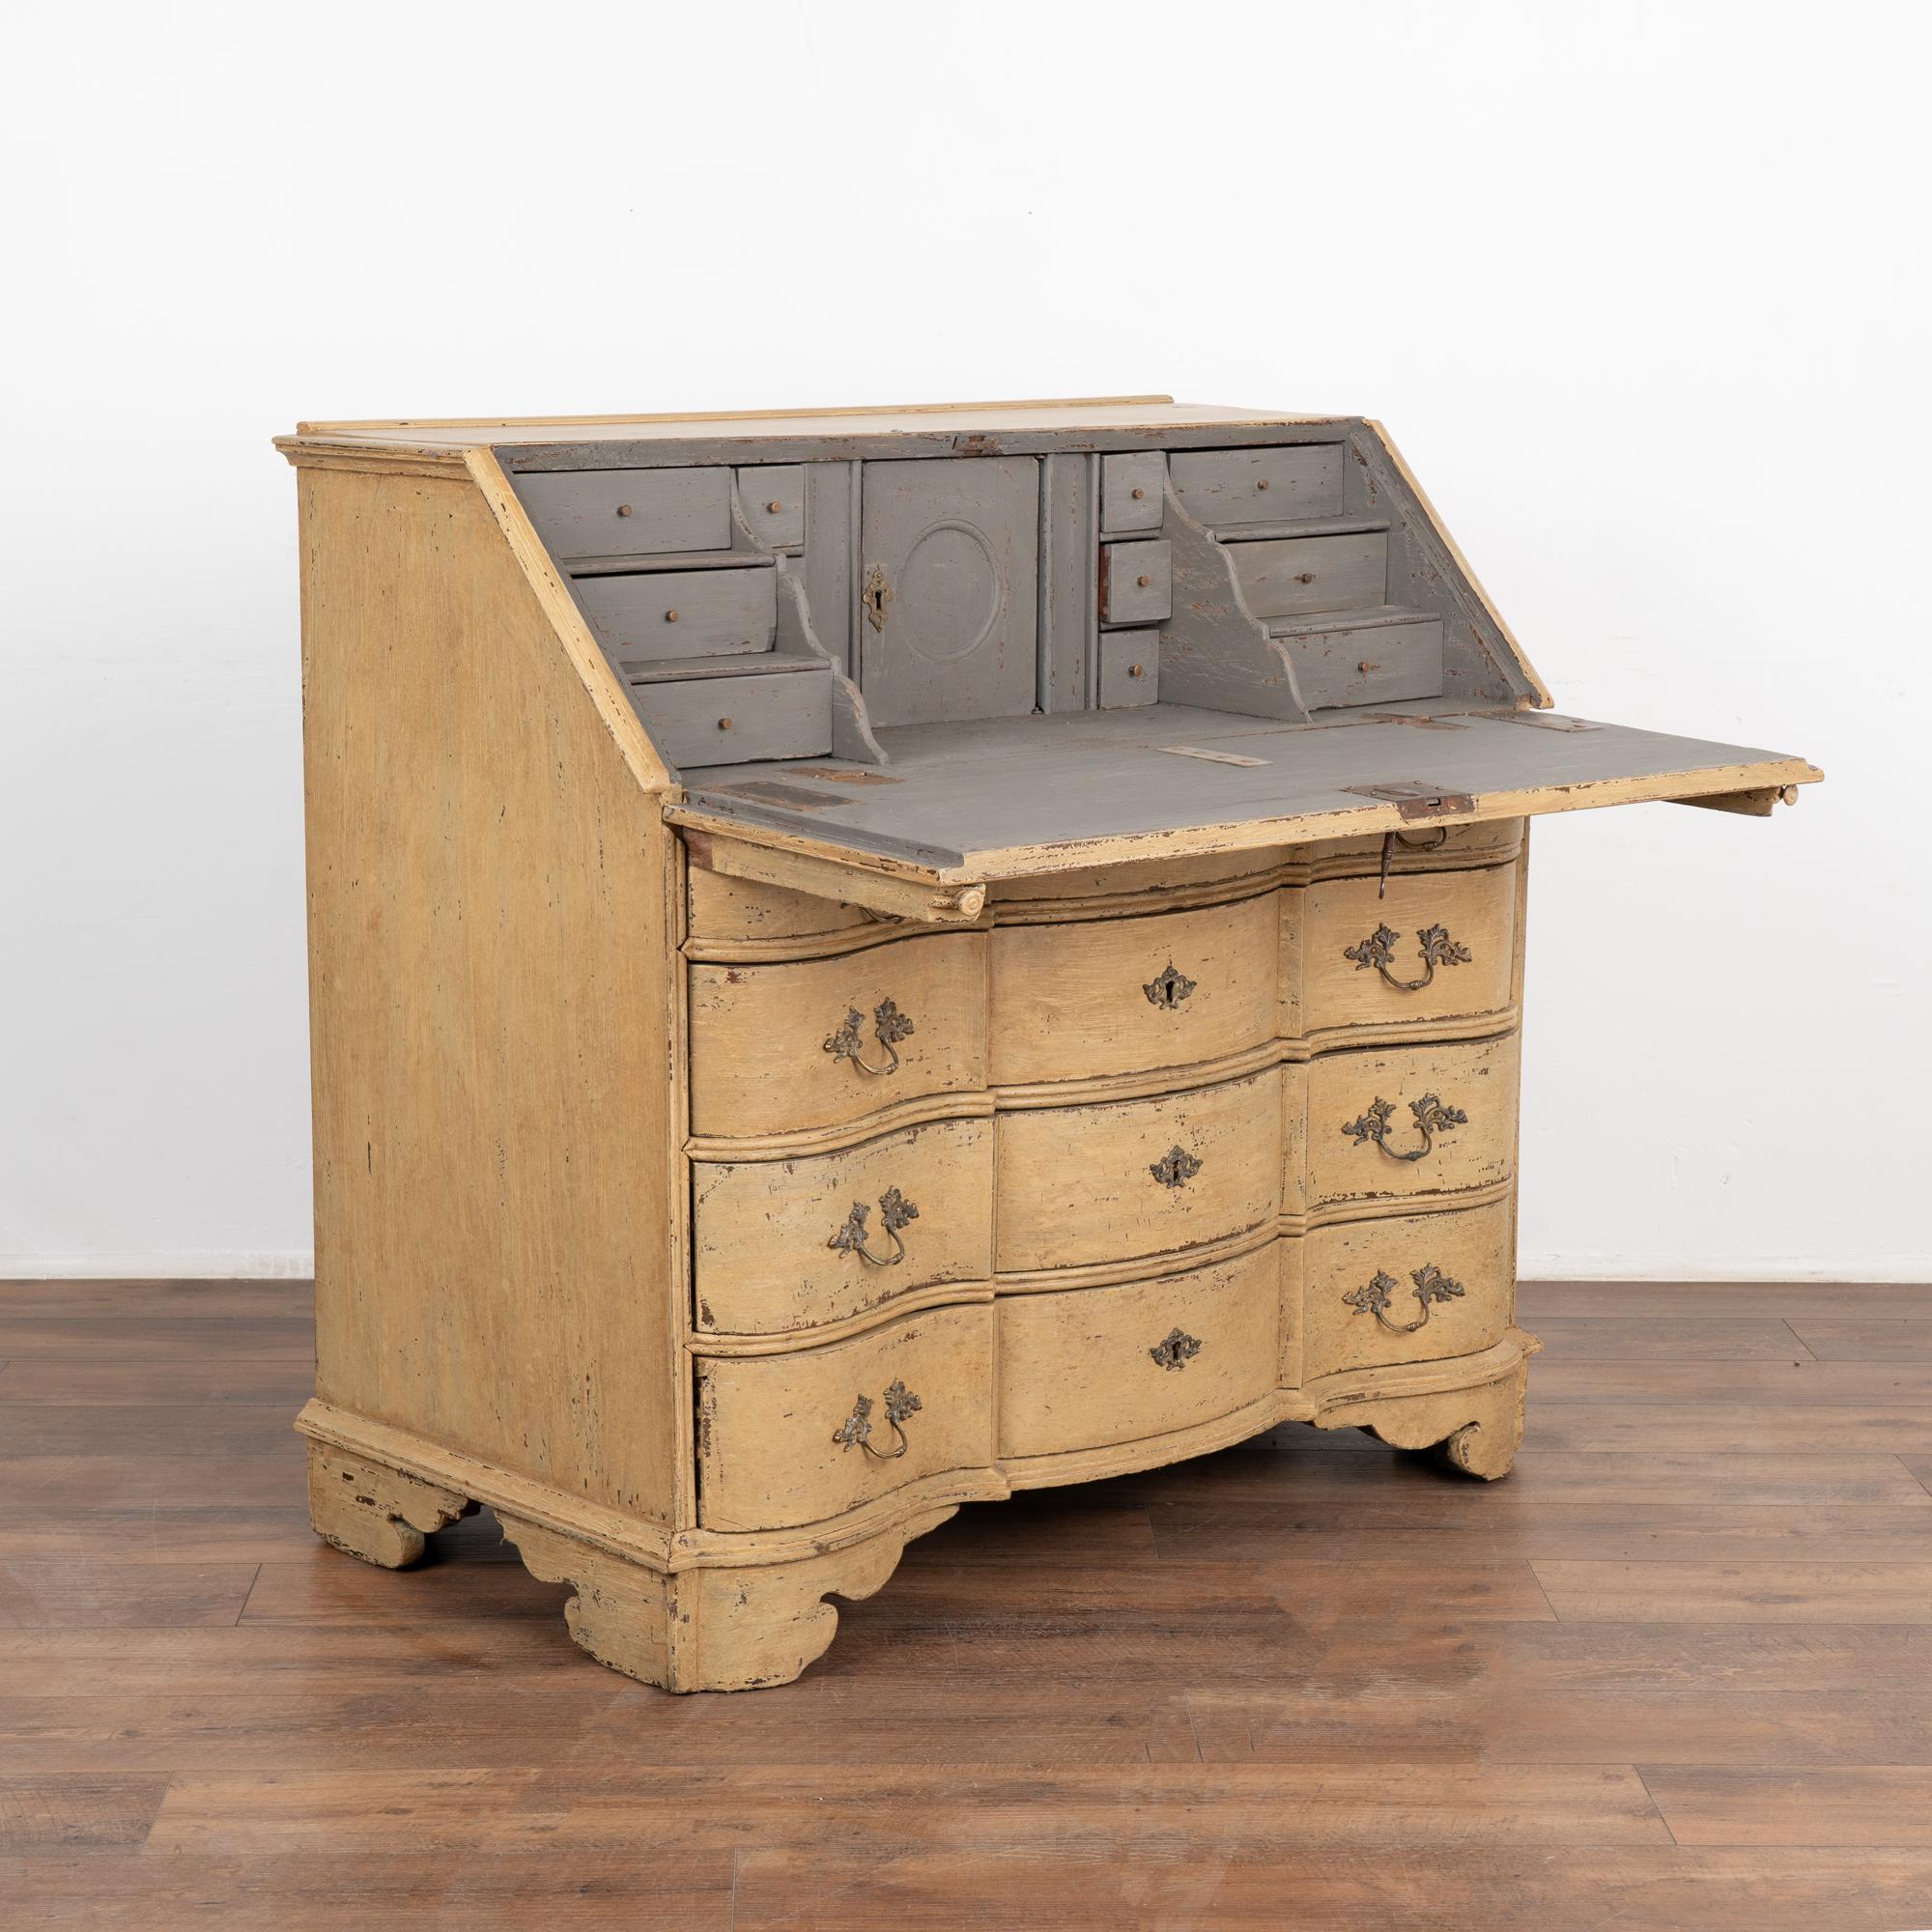 This oak secretary reflects the grace and class of European styling in the early 1800's with four serpentine drawers and curved skirt.
The traditional interior with 12 small drawers and central storage area offers the perfect space to organize.
This